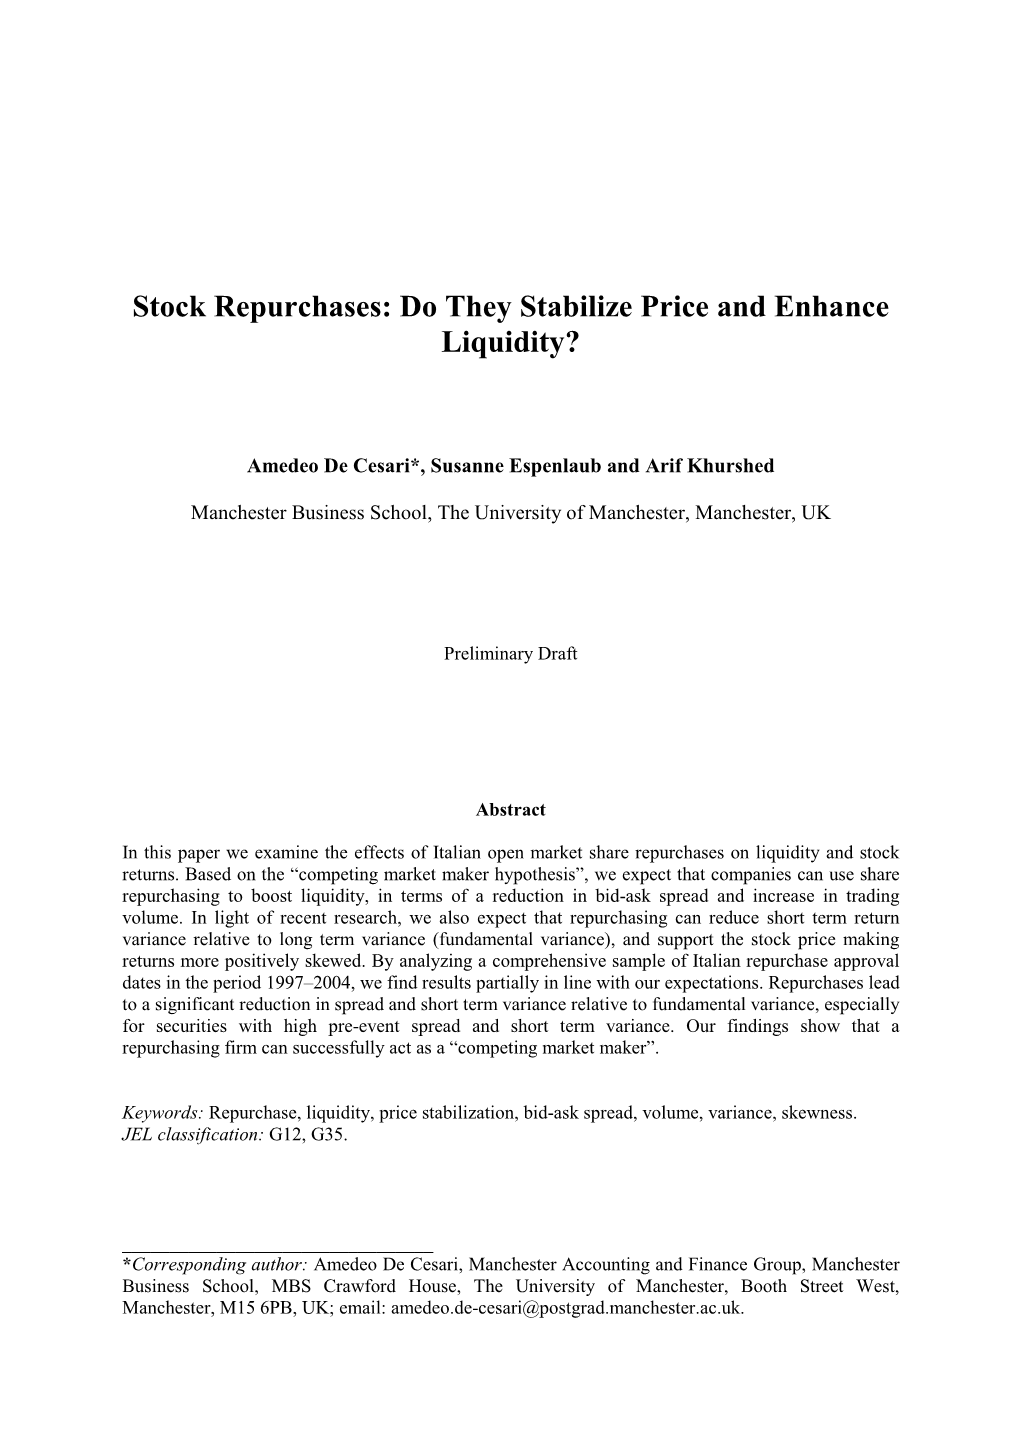 Stock Repurchases: Do They Stabilize Price and Enhance Liquidity?